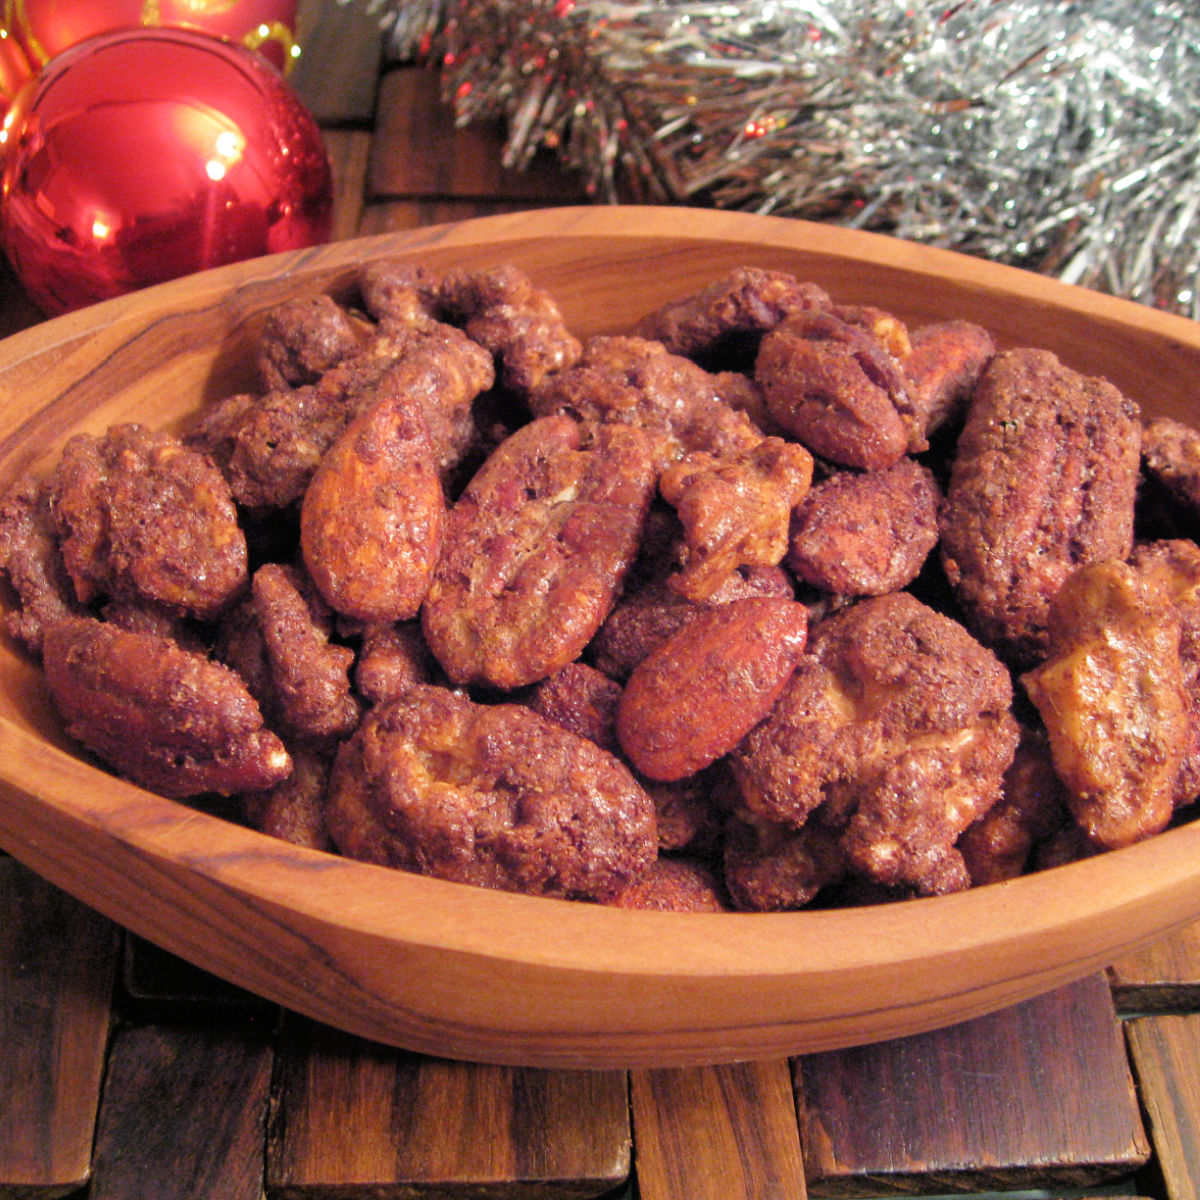 Holiday spiced nuts in wooden bowl